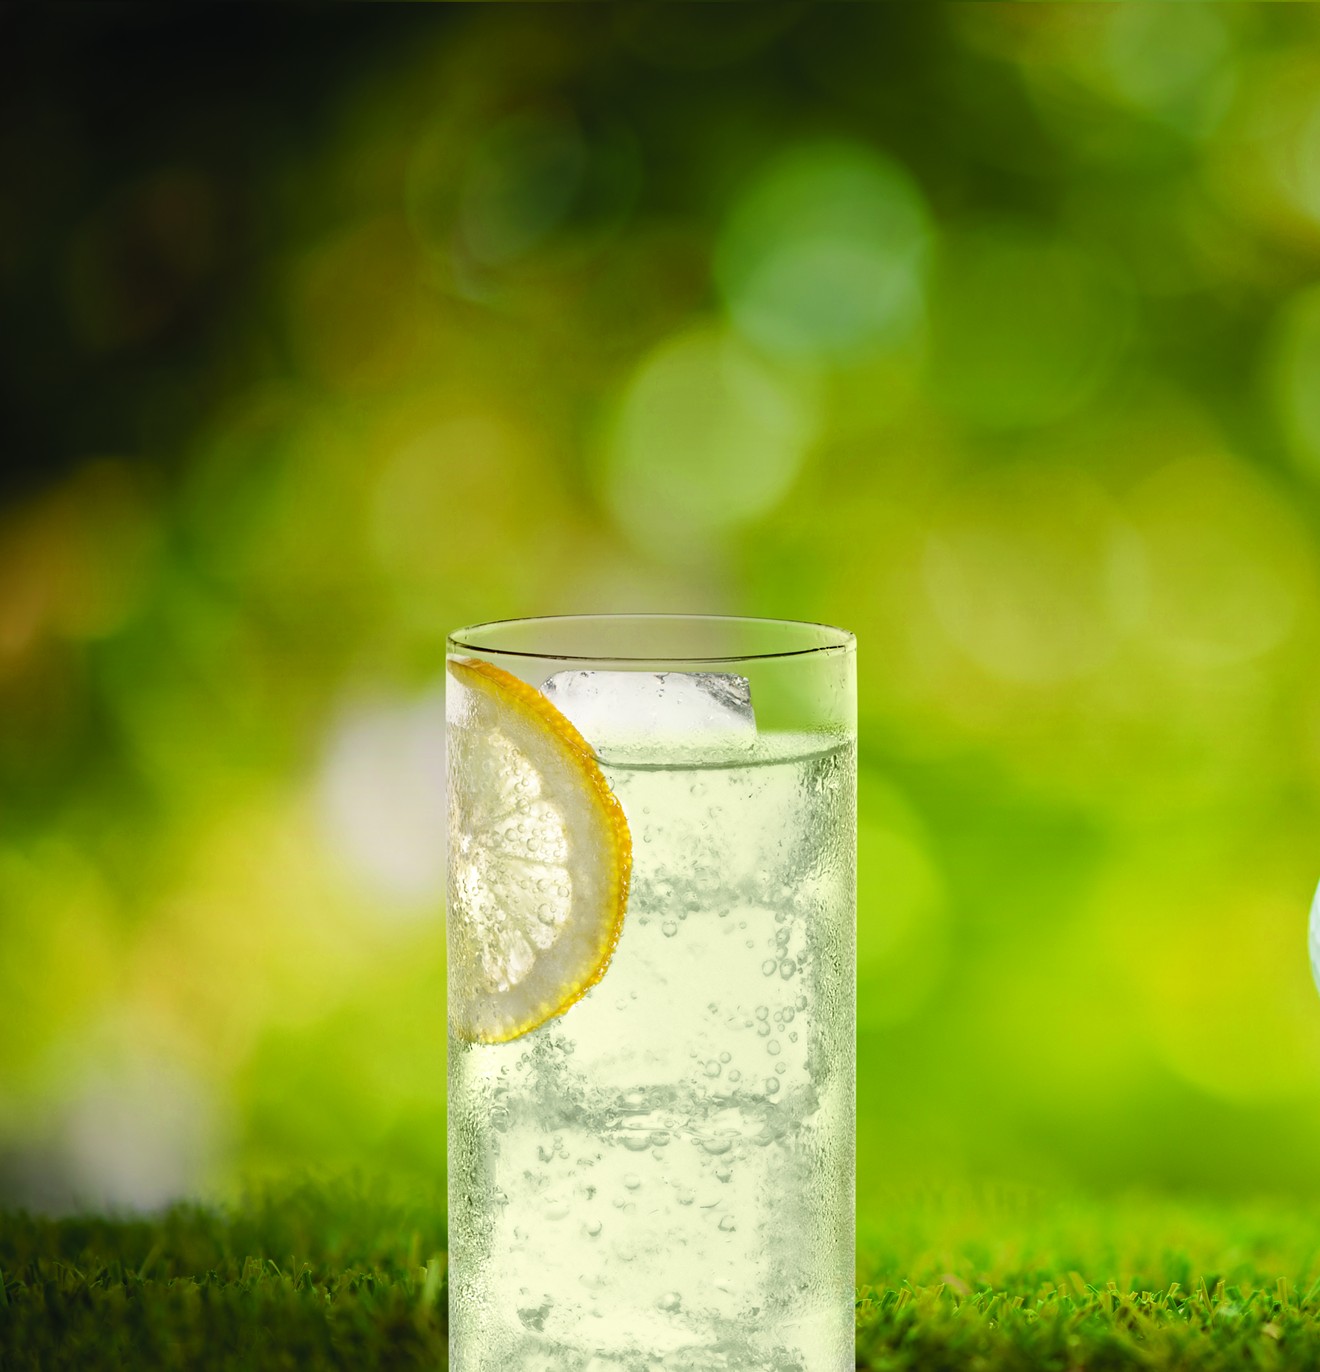 Grey Goose's Happiest Pear Par-Tee could make this weekend's golf-watching a little more interesting.